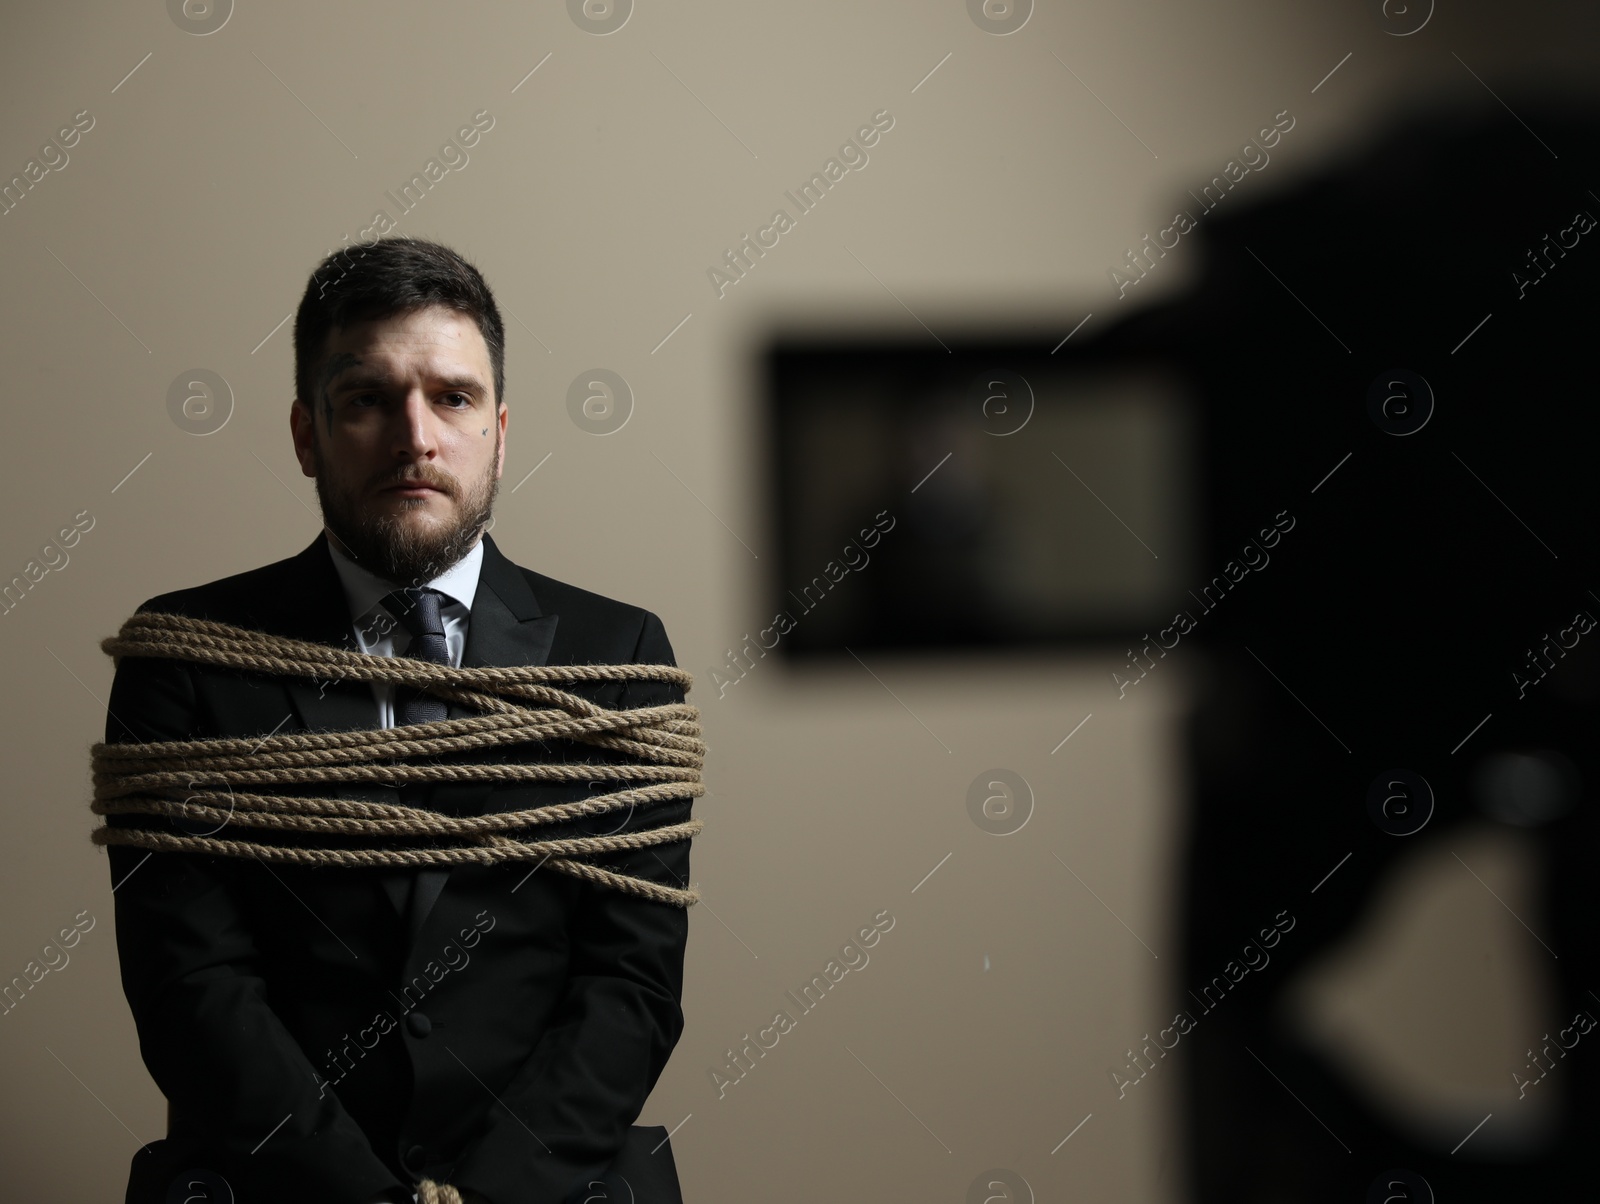 Photo of Man tied up and taken hostage near camera on grey background, selective focus